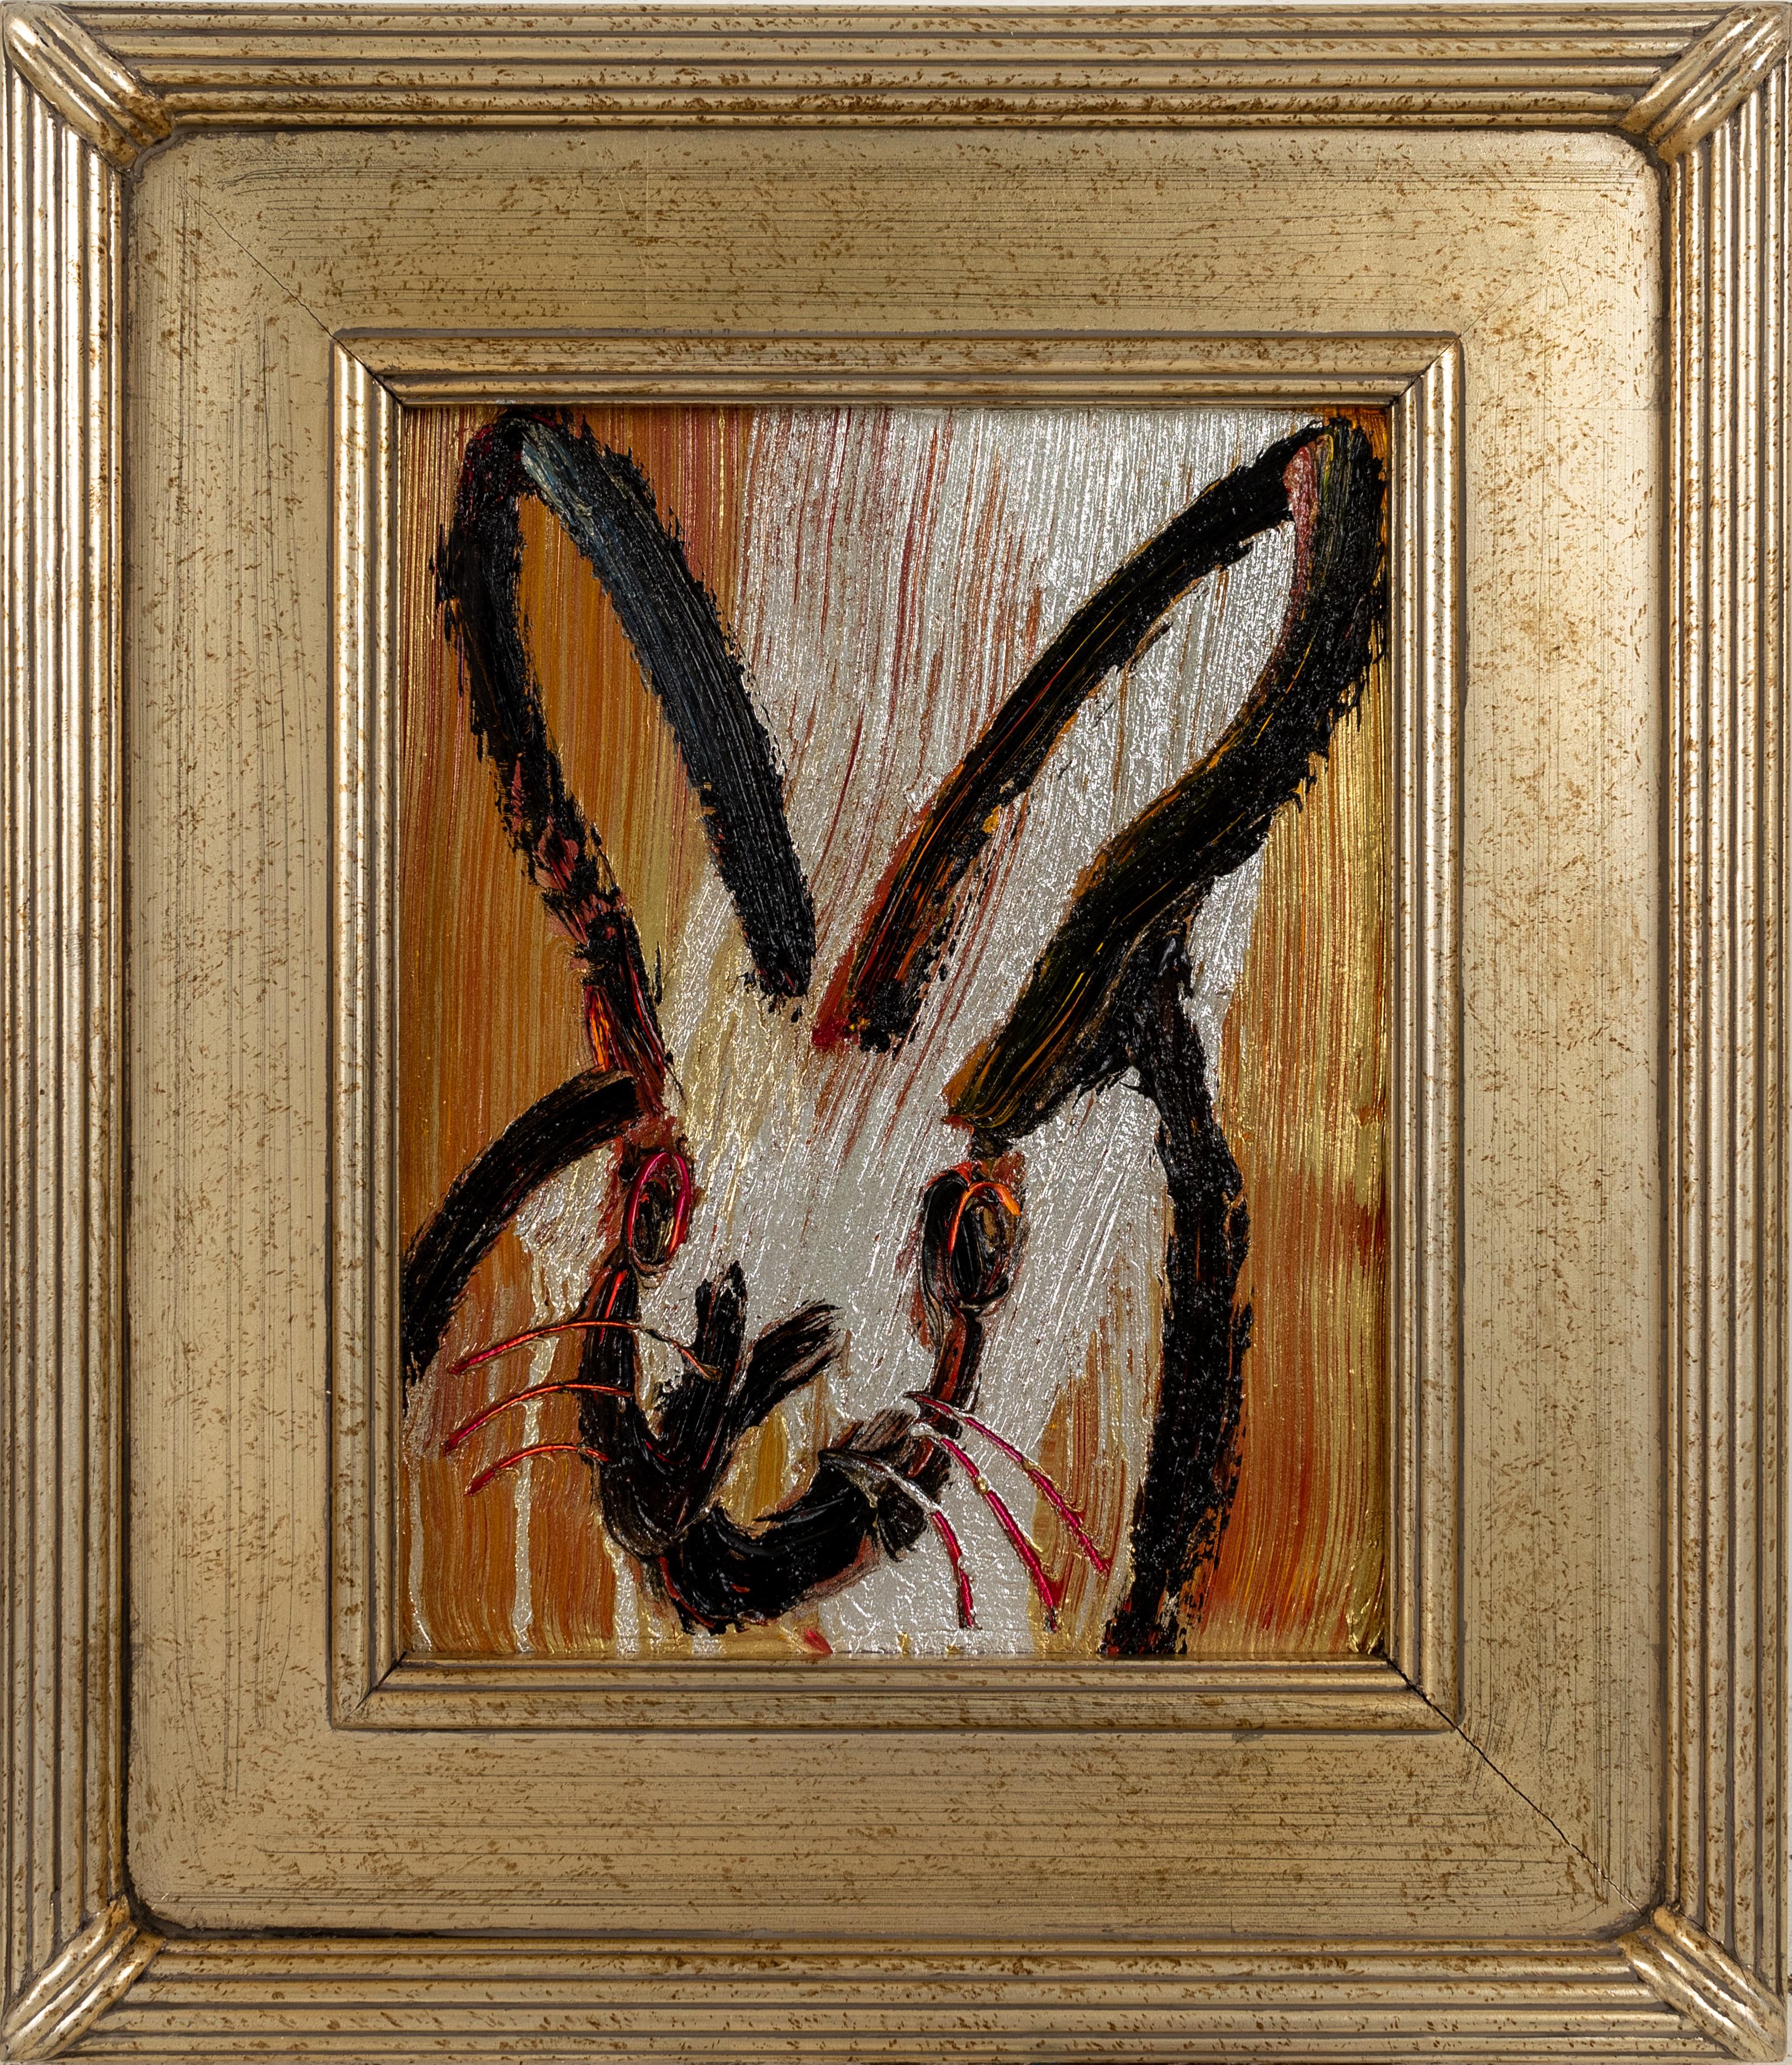 Painting size: 10 x 8 inches 
Framed Size: 15 x 13 inches
This gold, silver, bronze and black bunny demonstrates Hunt Slonem's  neo-expressionist style. Framed in a vintage frame.   These layered, and thickly painted smaller pieces exemplify his